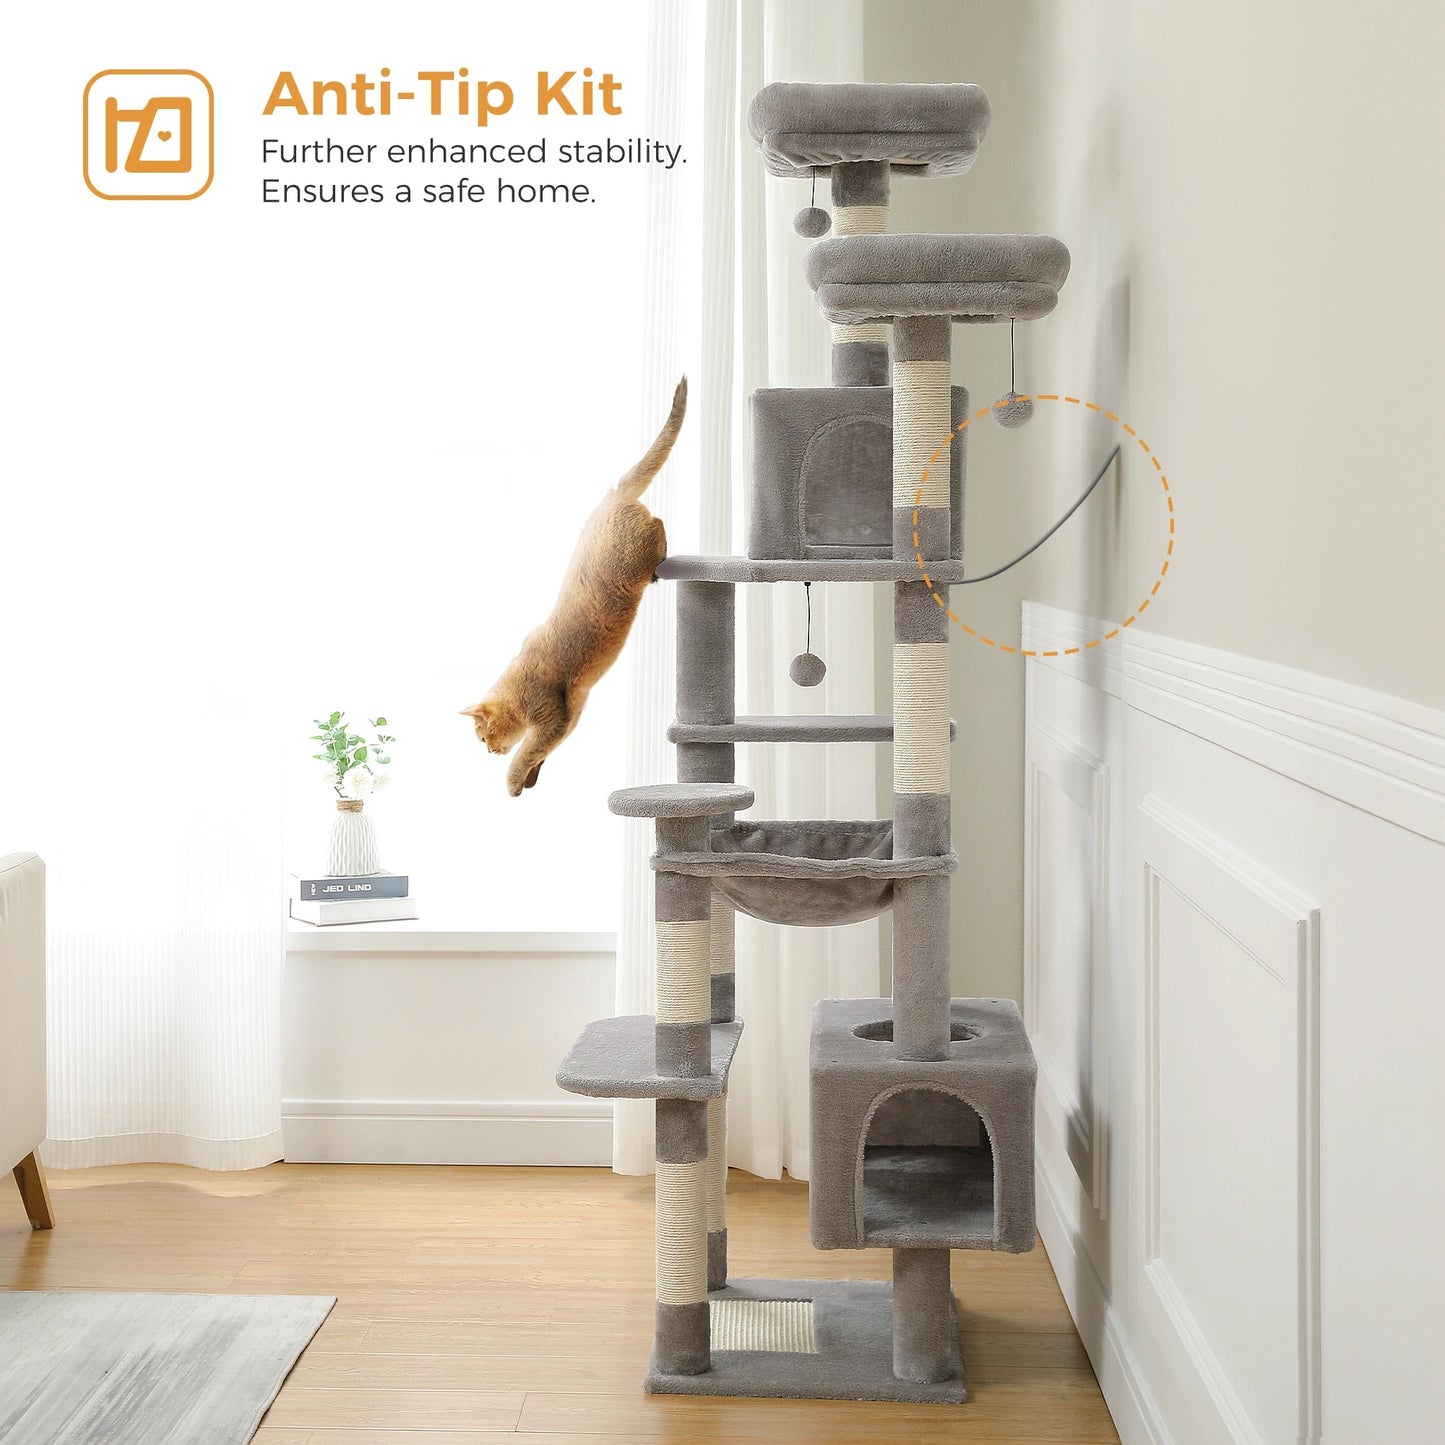 Cat 72" Large Sisal-Covered Tree Tower